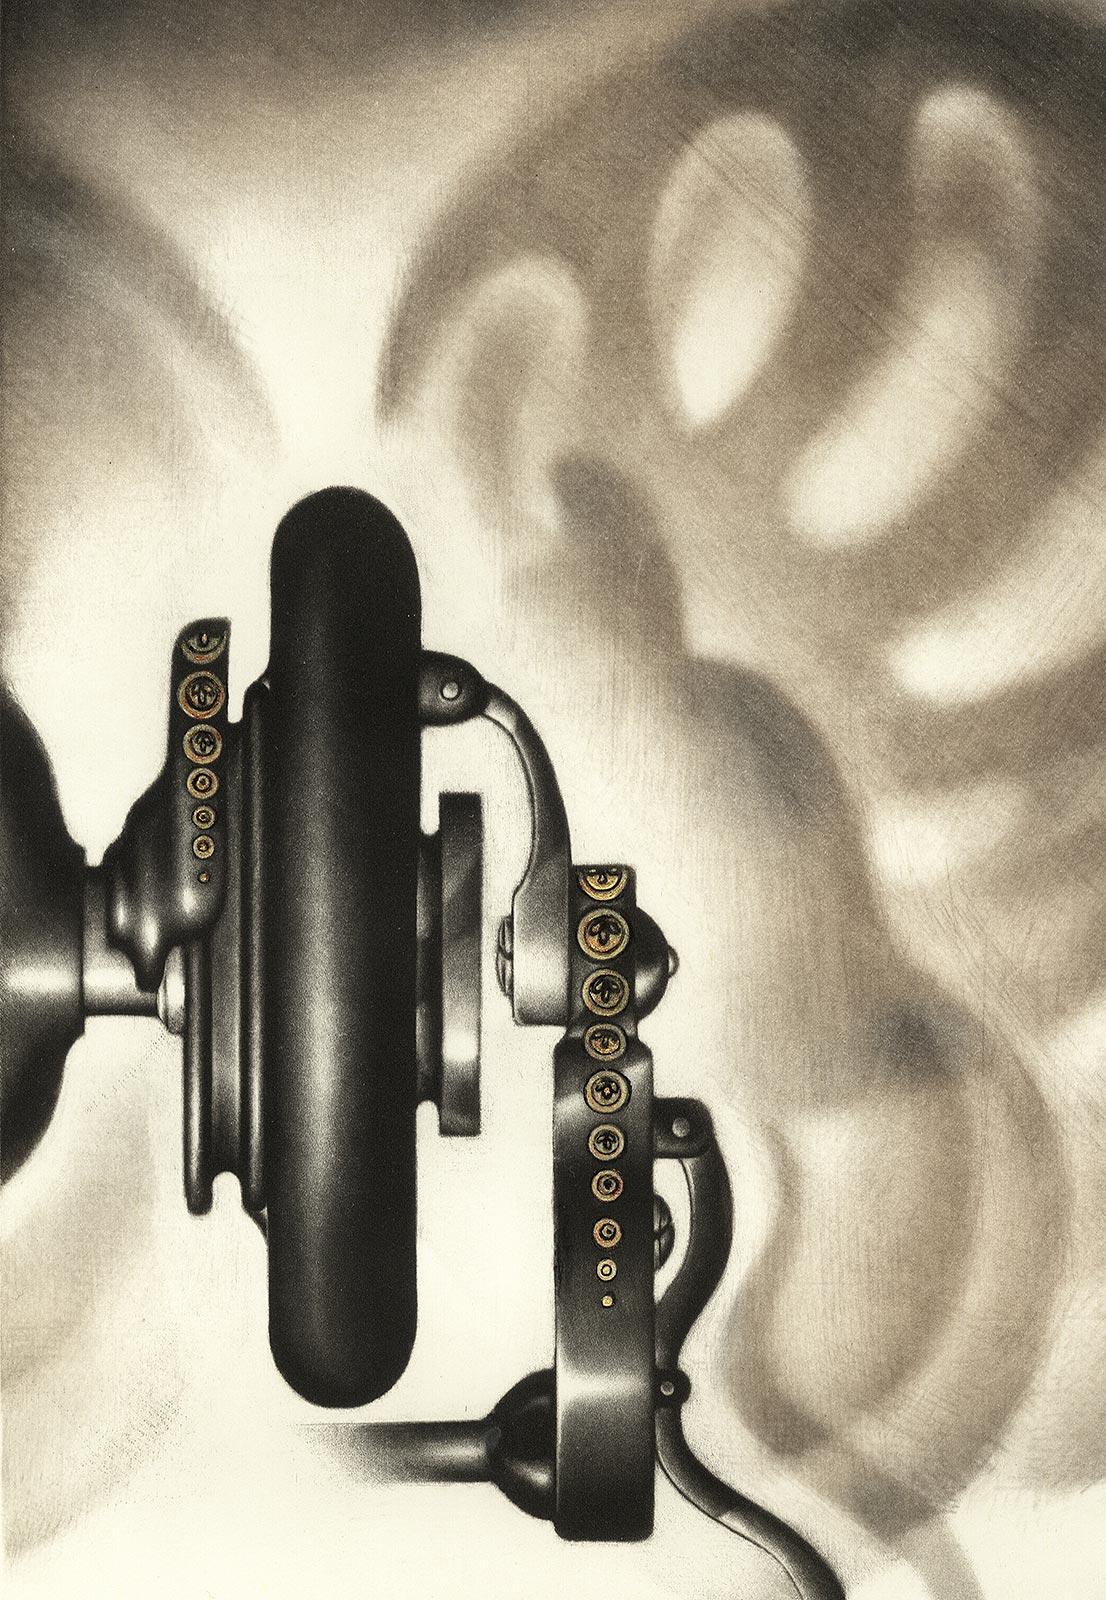 Singer III (The wheel turning part of a sewing machine casts shadows on wall) - Print by Carol Wax